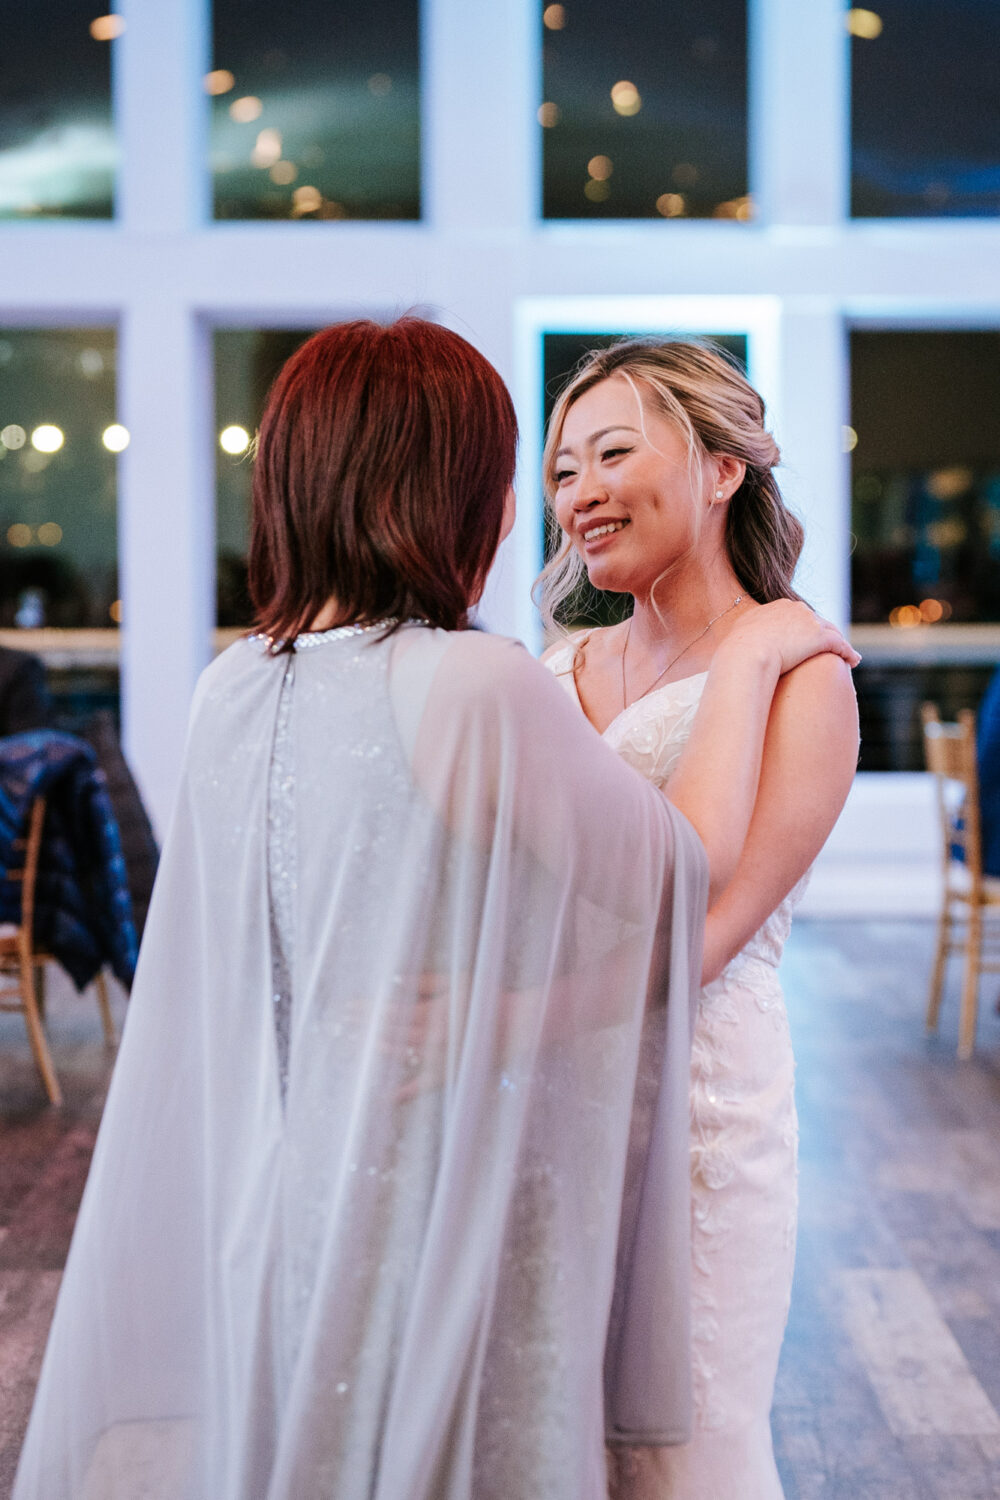 bride smiling at her mother while dancing together